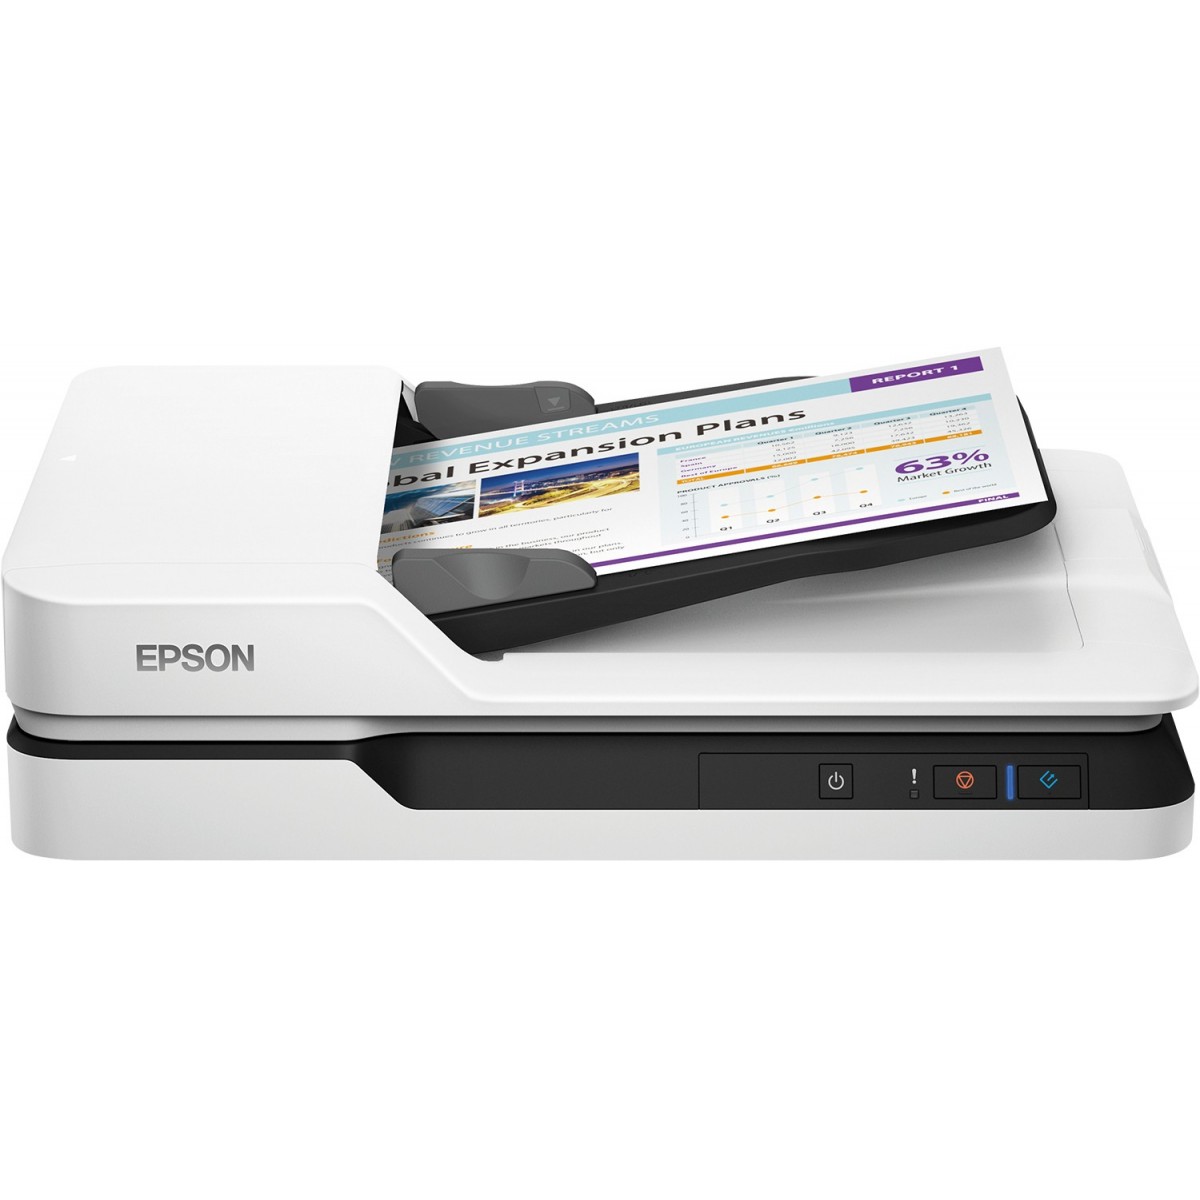 Epson WorkForce DS-1630 Power PDF - 210 x 3048 mm - 1200 x 1200 DPI - 50 ppm - ADF scanner - White - 1500 pages